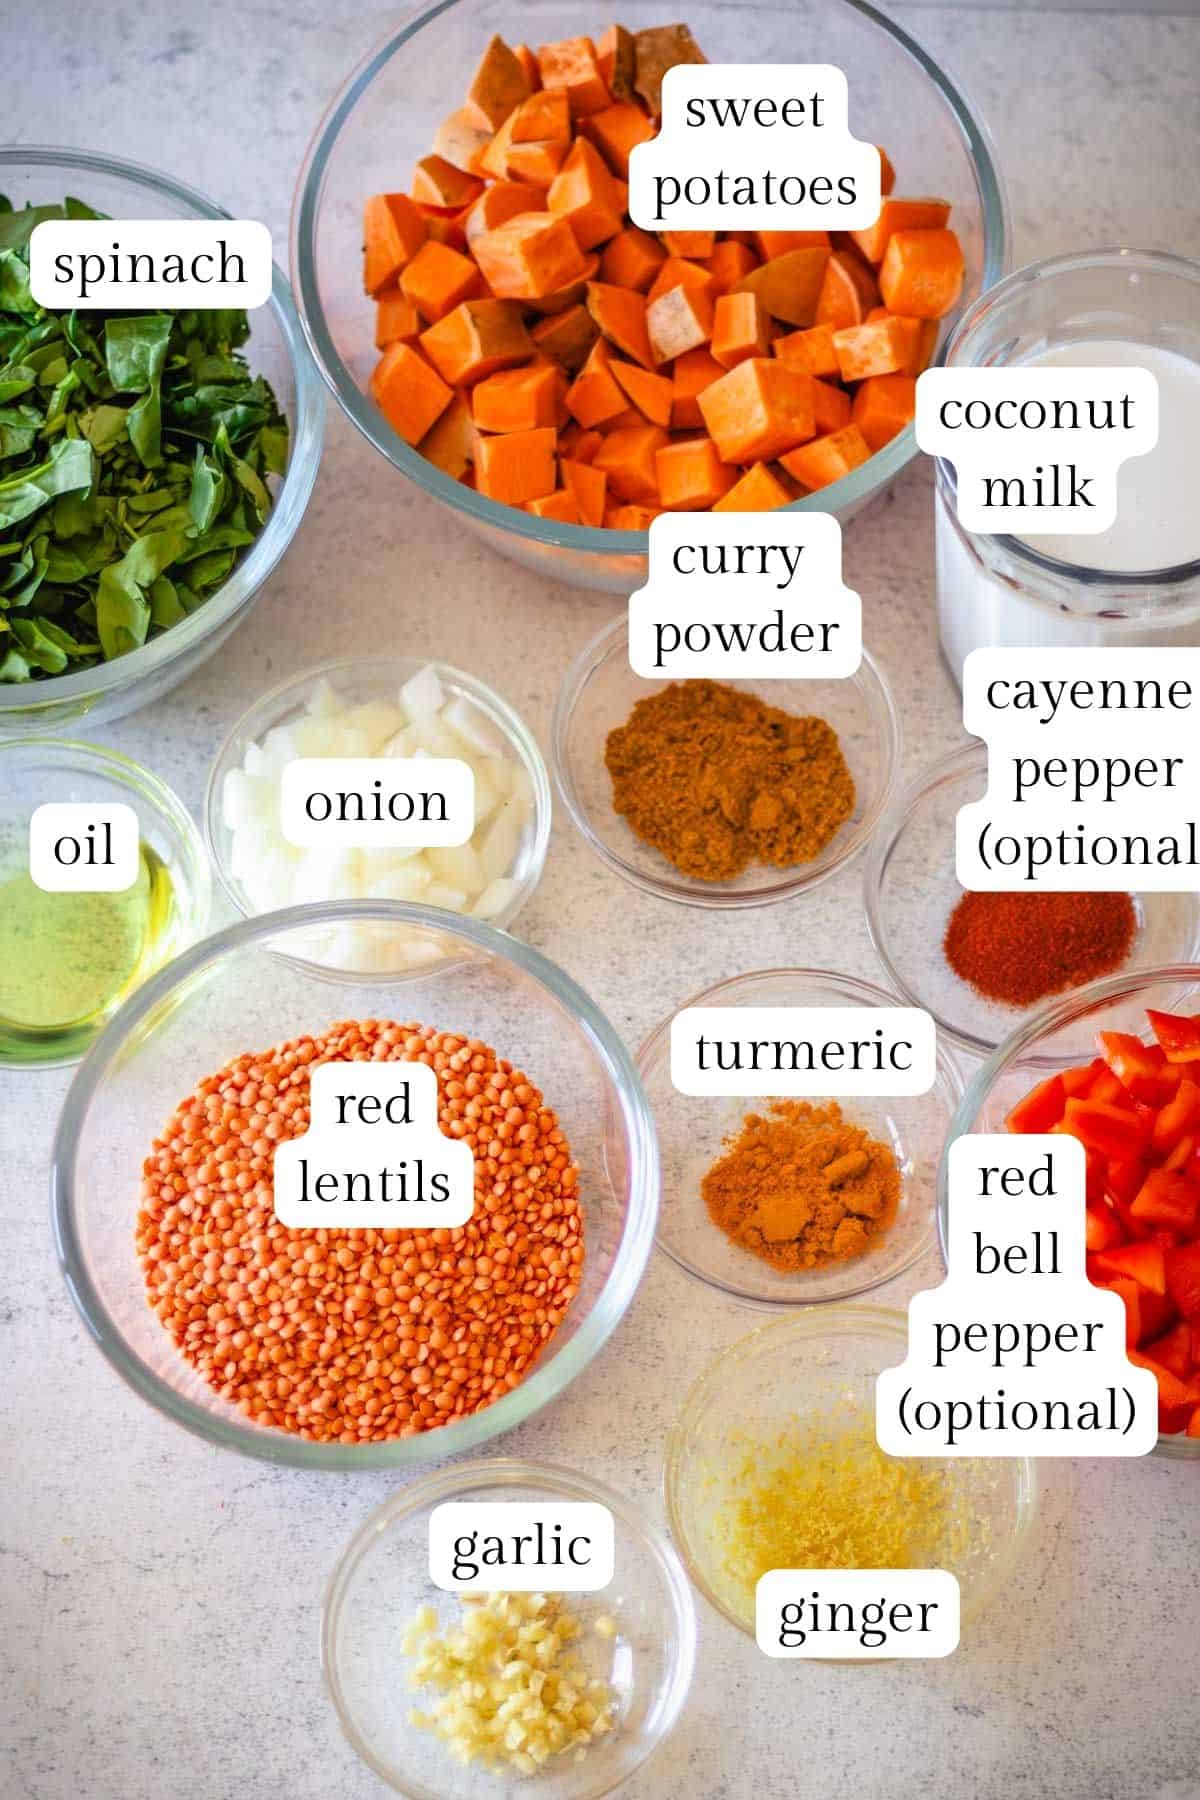 Ingredients to make red lentil, including lentils, coconut milk, sweet potatoes, and spinach in separate glass bowls with text labels.